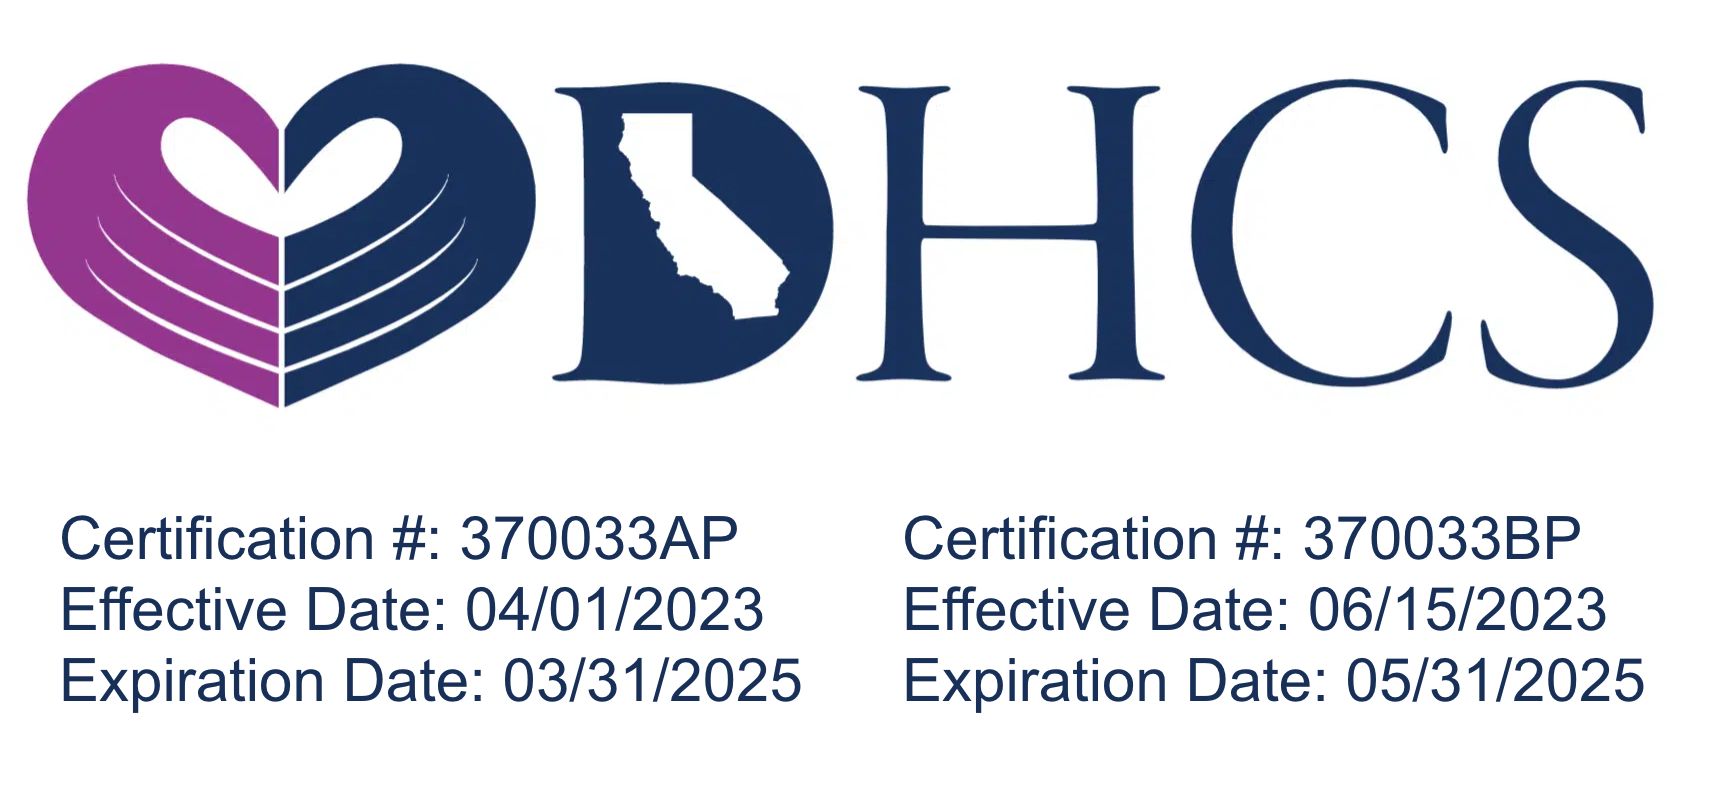 California Department of Health Care Services Logo: Certification #: 370033AP<br />
Effective Date: 04/01/2023<br />
Expiration Date: 03/31/2025, Certification #: 370033BP<br />
Effective Date: 06/15/2023<br />
Expiration Date: 05/31/2025